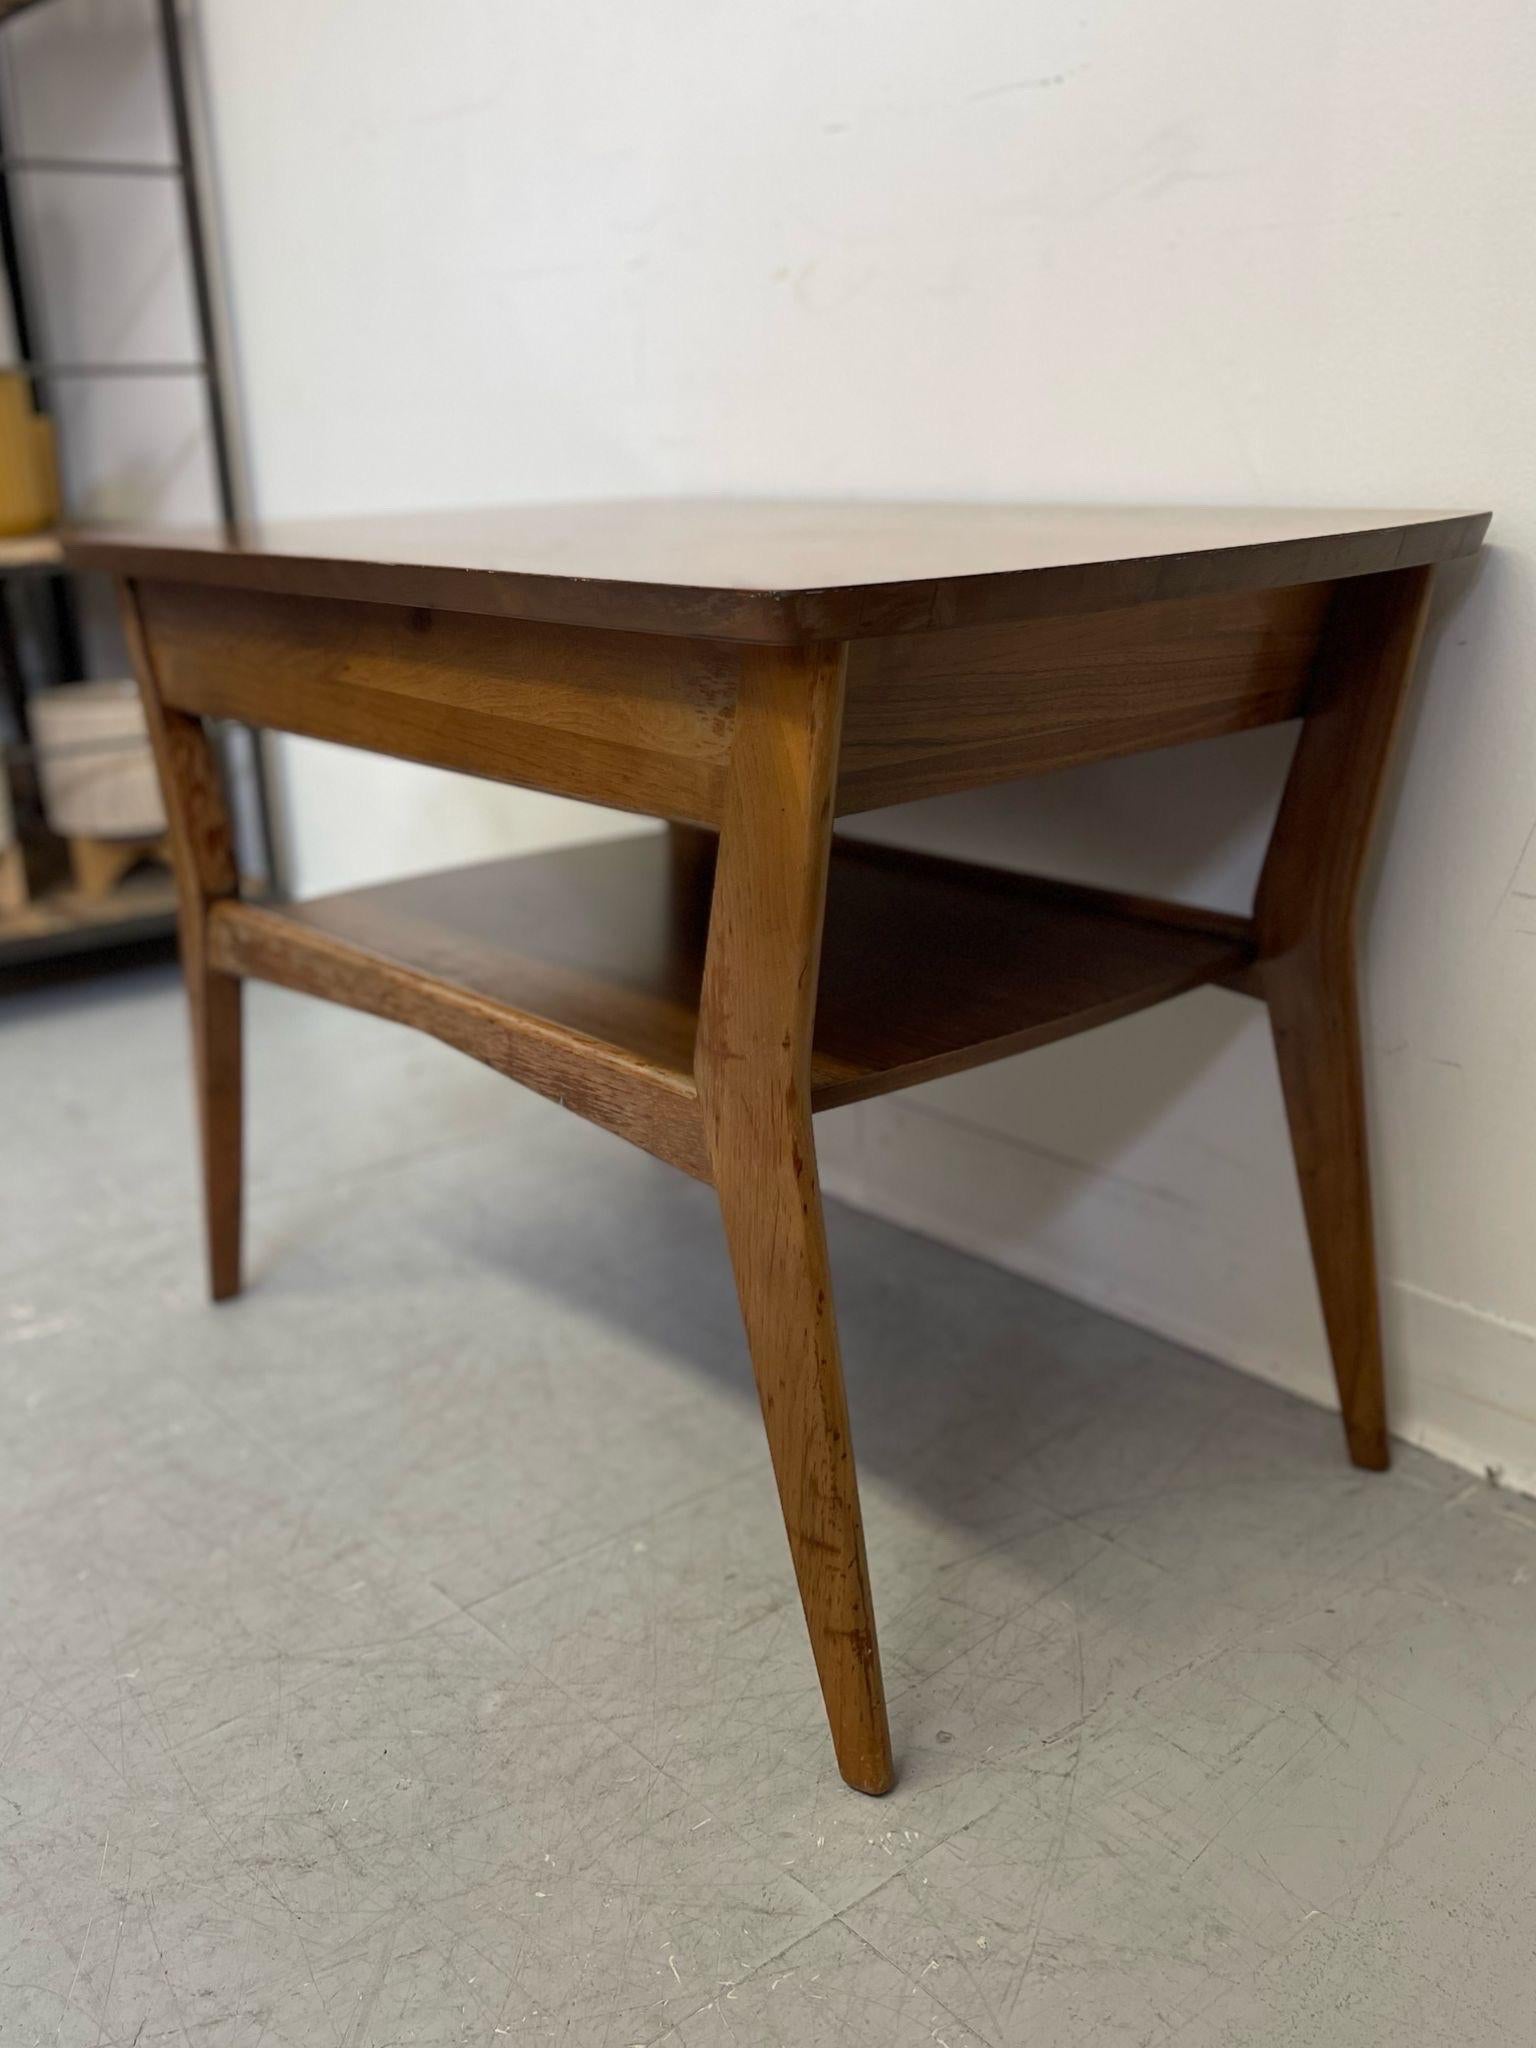 Wood Vintage Mid Century Modern Single Drawer End Table by Mersman. For Sale